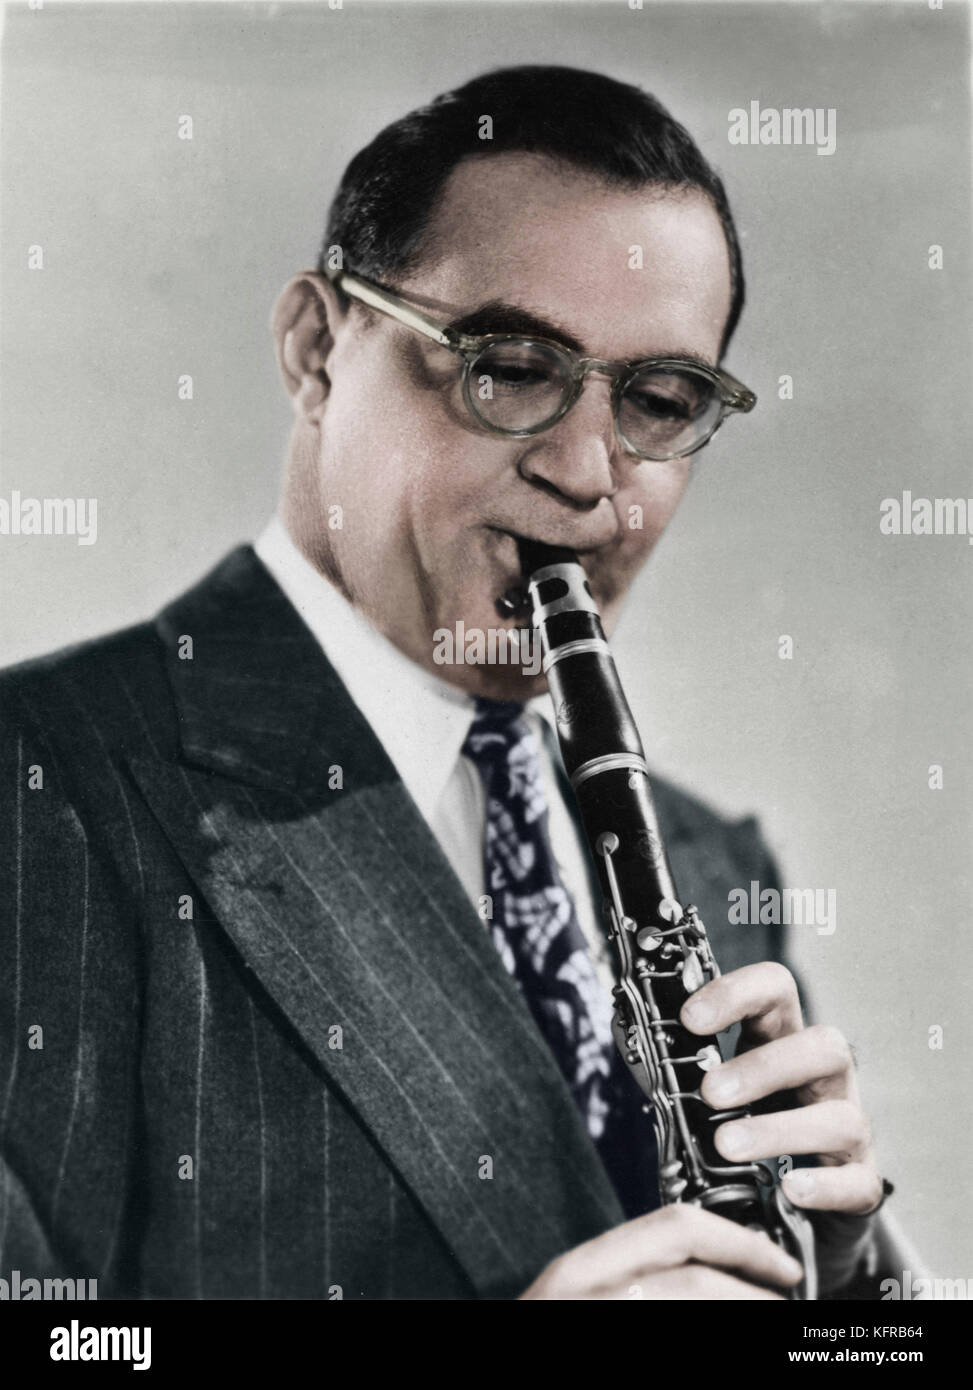 GOODMAN, Benny - playing clarinet from background on band leaders American jazz clarinettist 1909-1986 Stock Photo